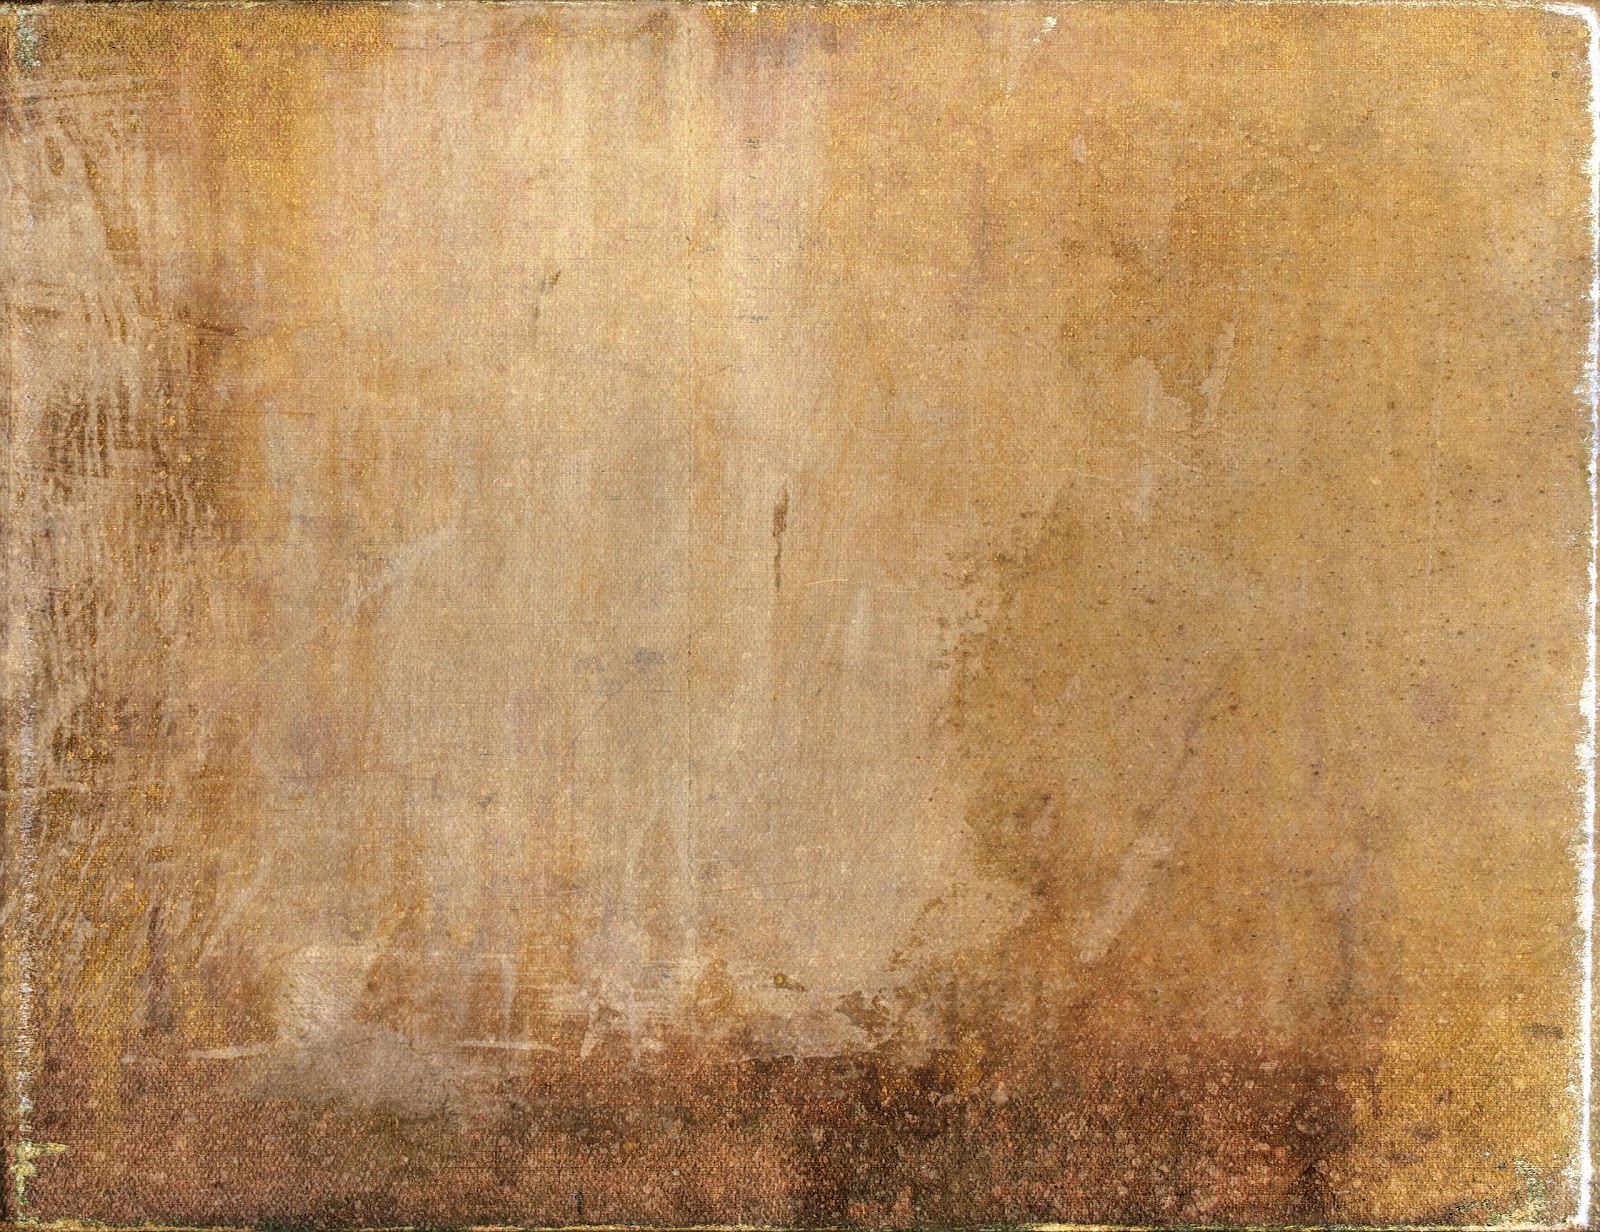 Shadowhouse Creations: Old Canvas Texture Set